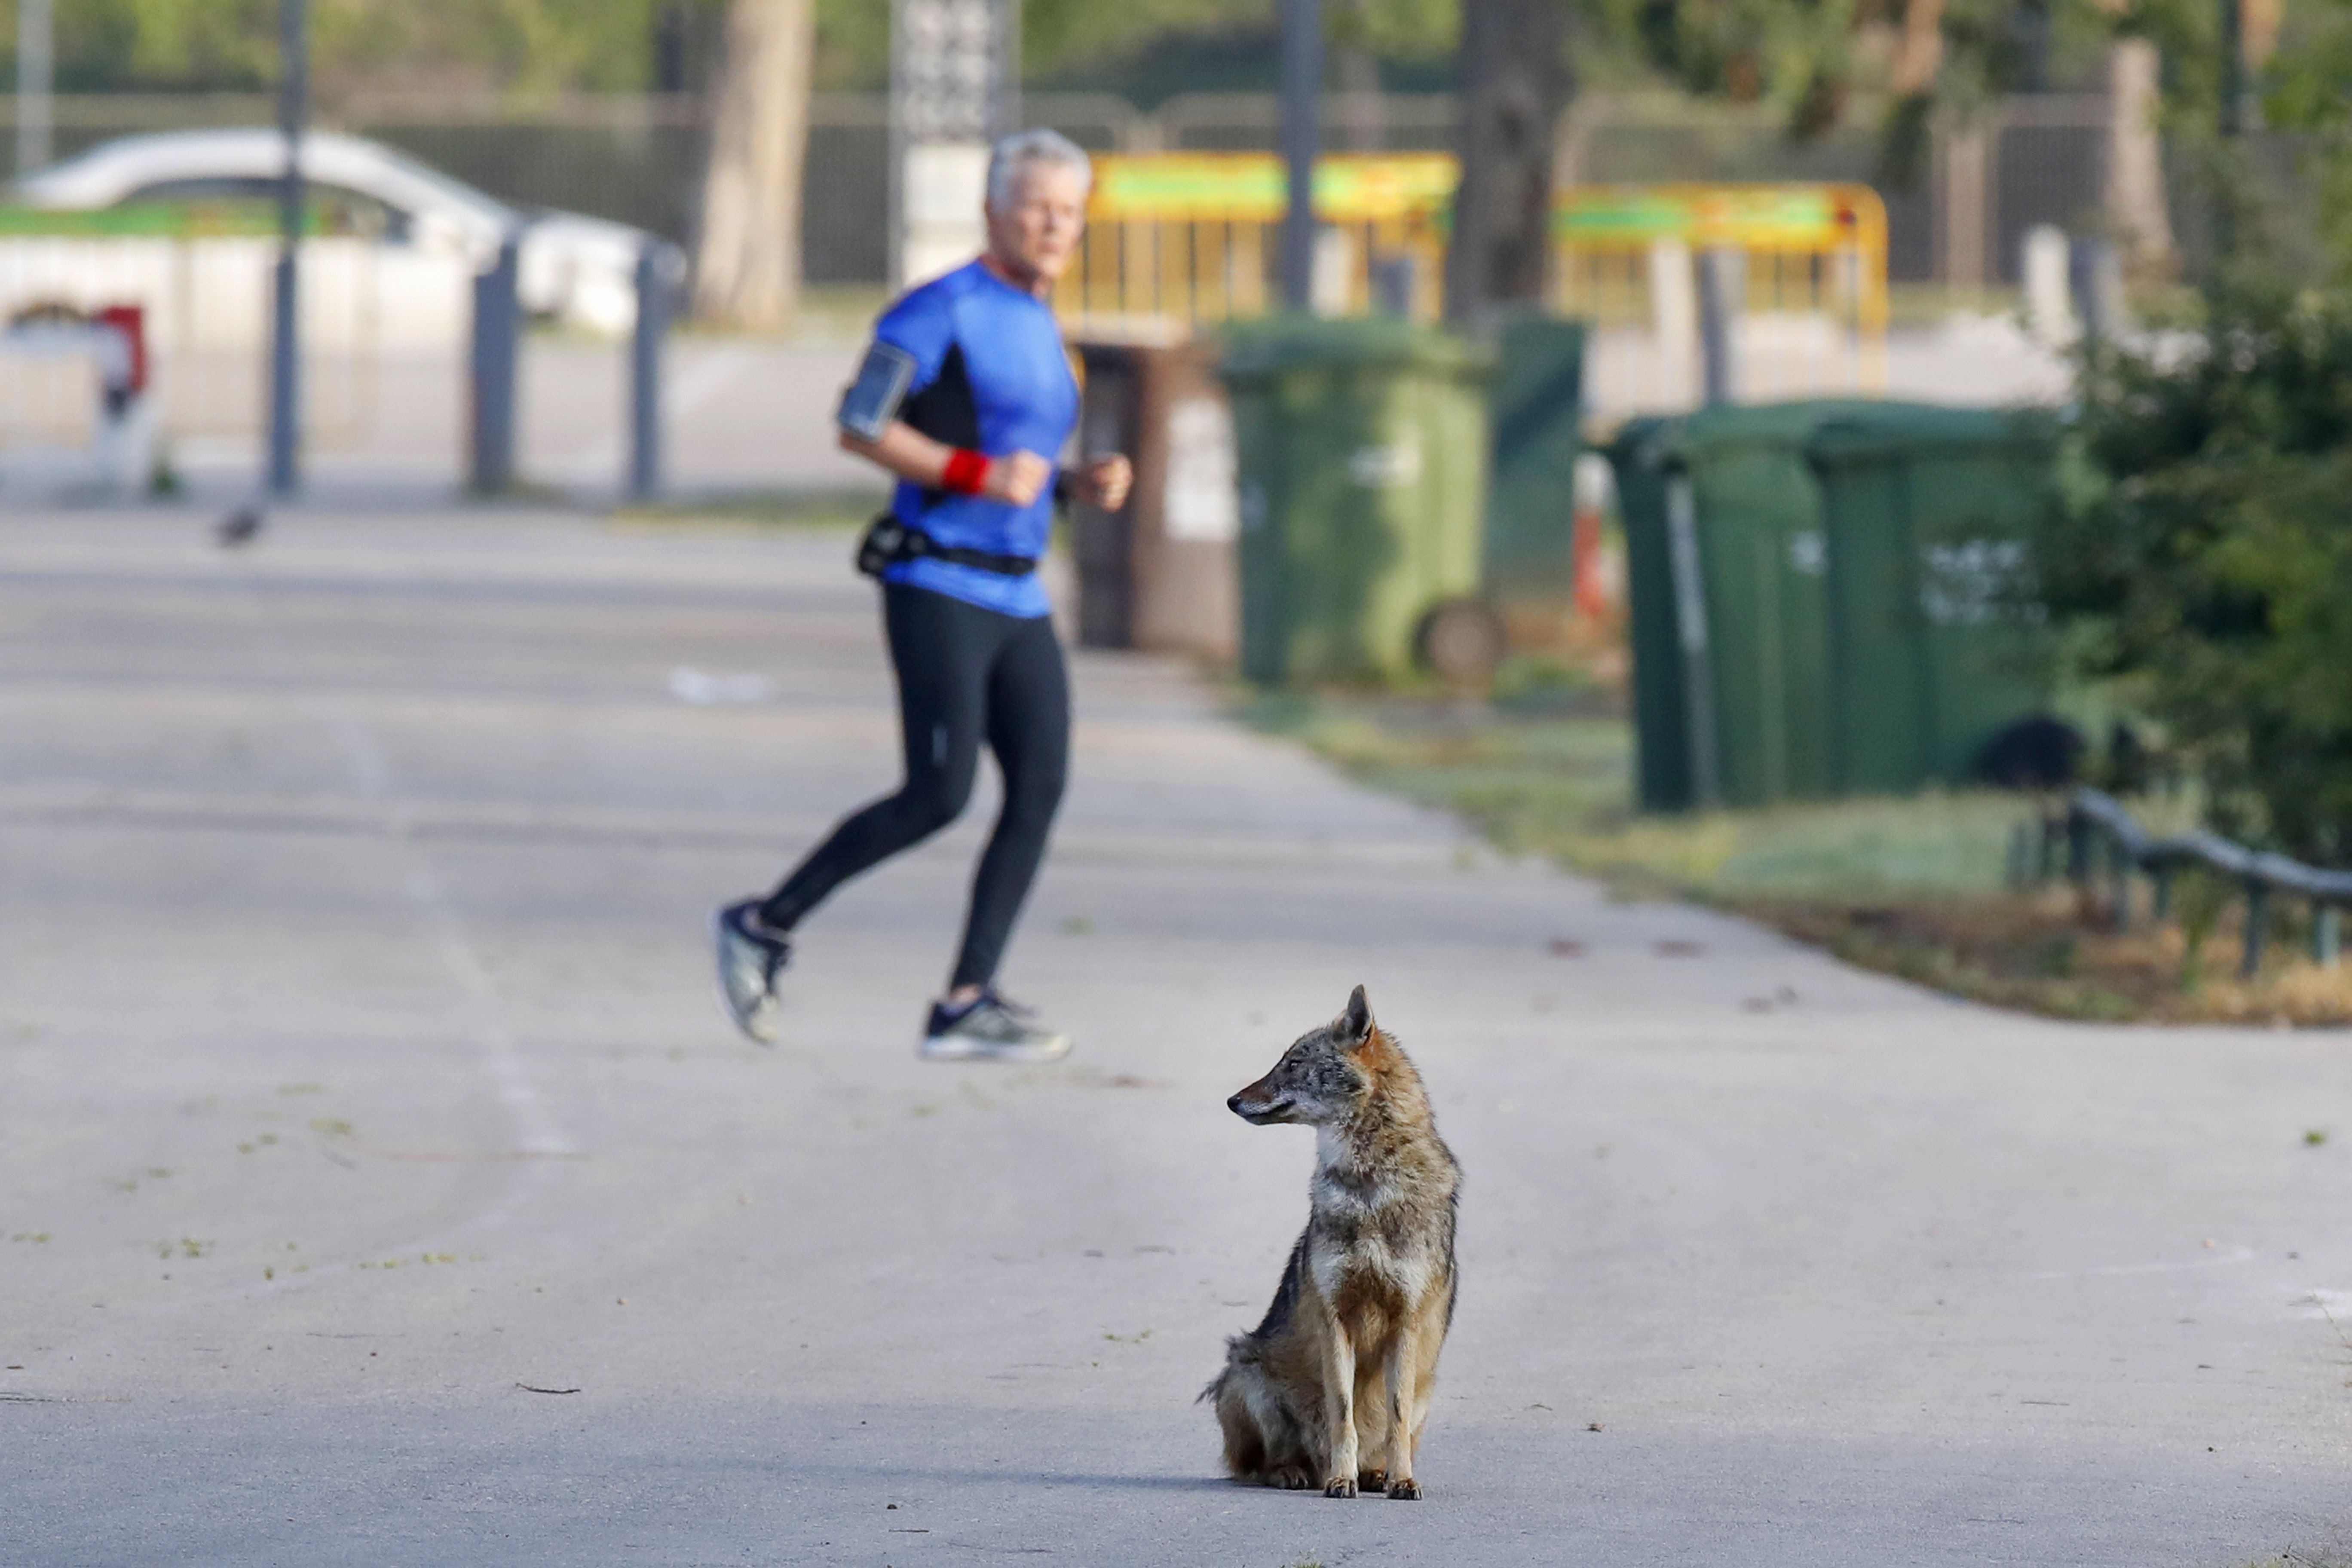 A jackal rests on a paved pathway in Yarkon Park in the Israeli coastal city of Tel Aviv. (Photo by JACK GUEZ/AFP via Getty Images)